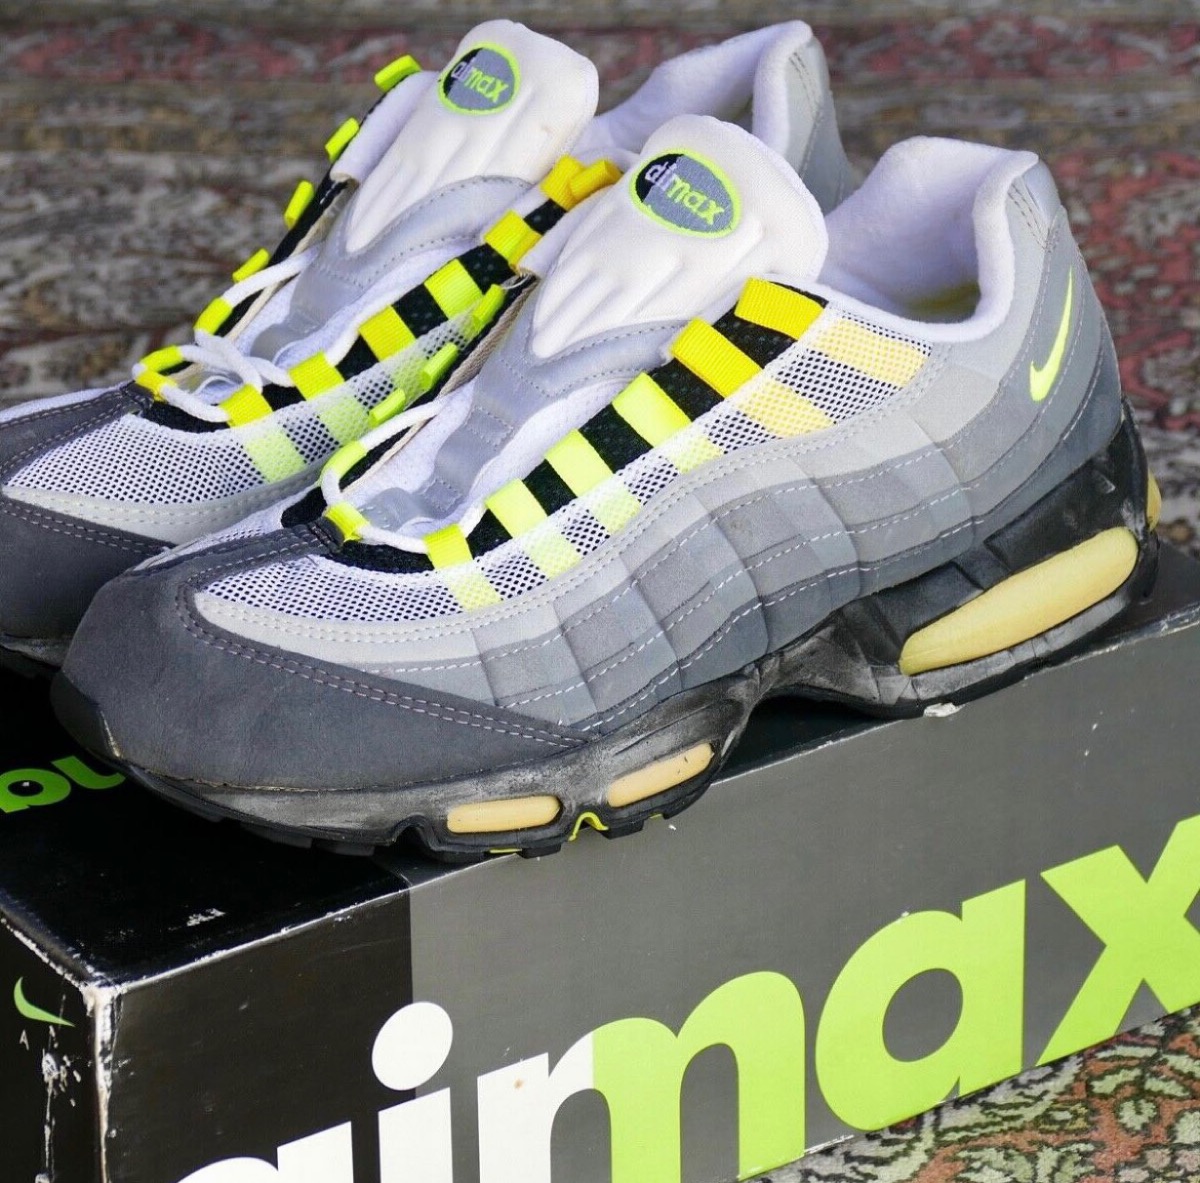 Nike Air Max 95 OG “Big Bubble”に復刻の噂が浮上 | UP TO DATE